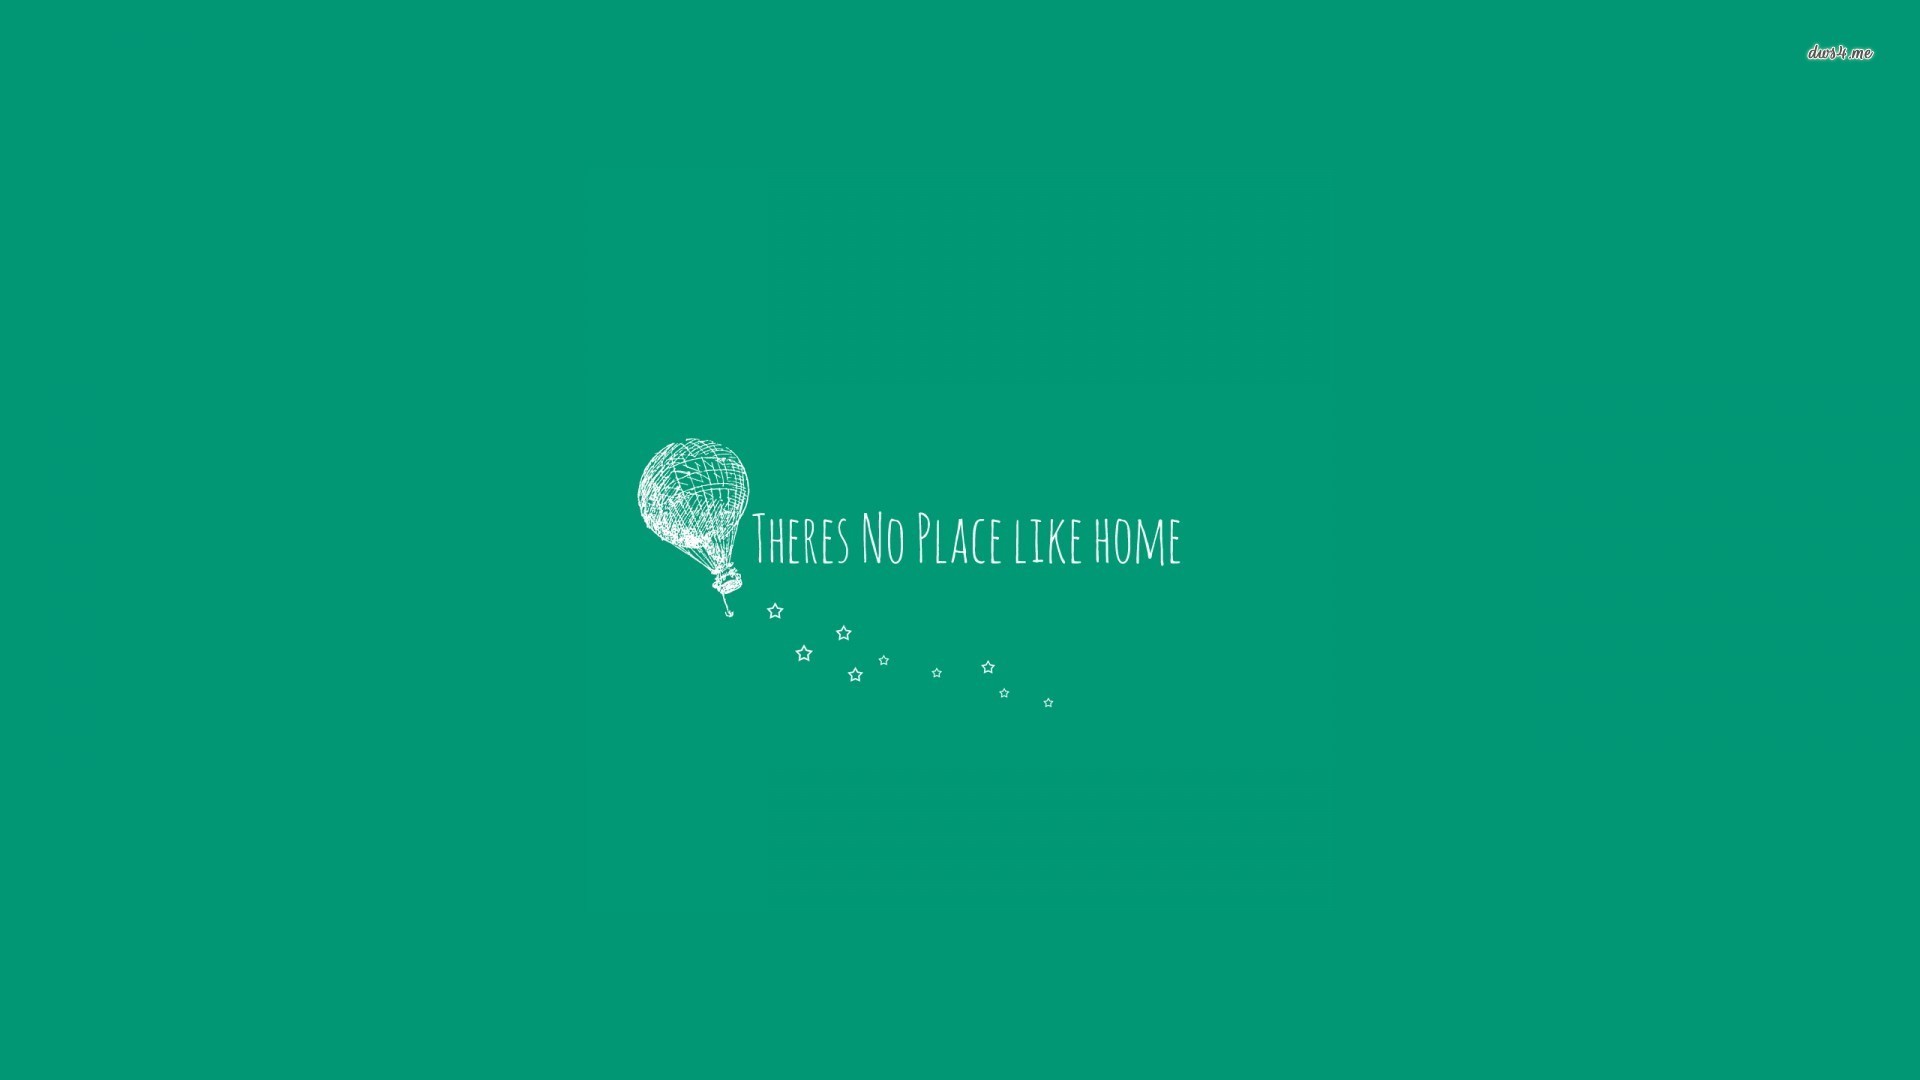 1920x1080 ... There is no place like home wallpaper ; more. Typography Â· Home